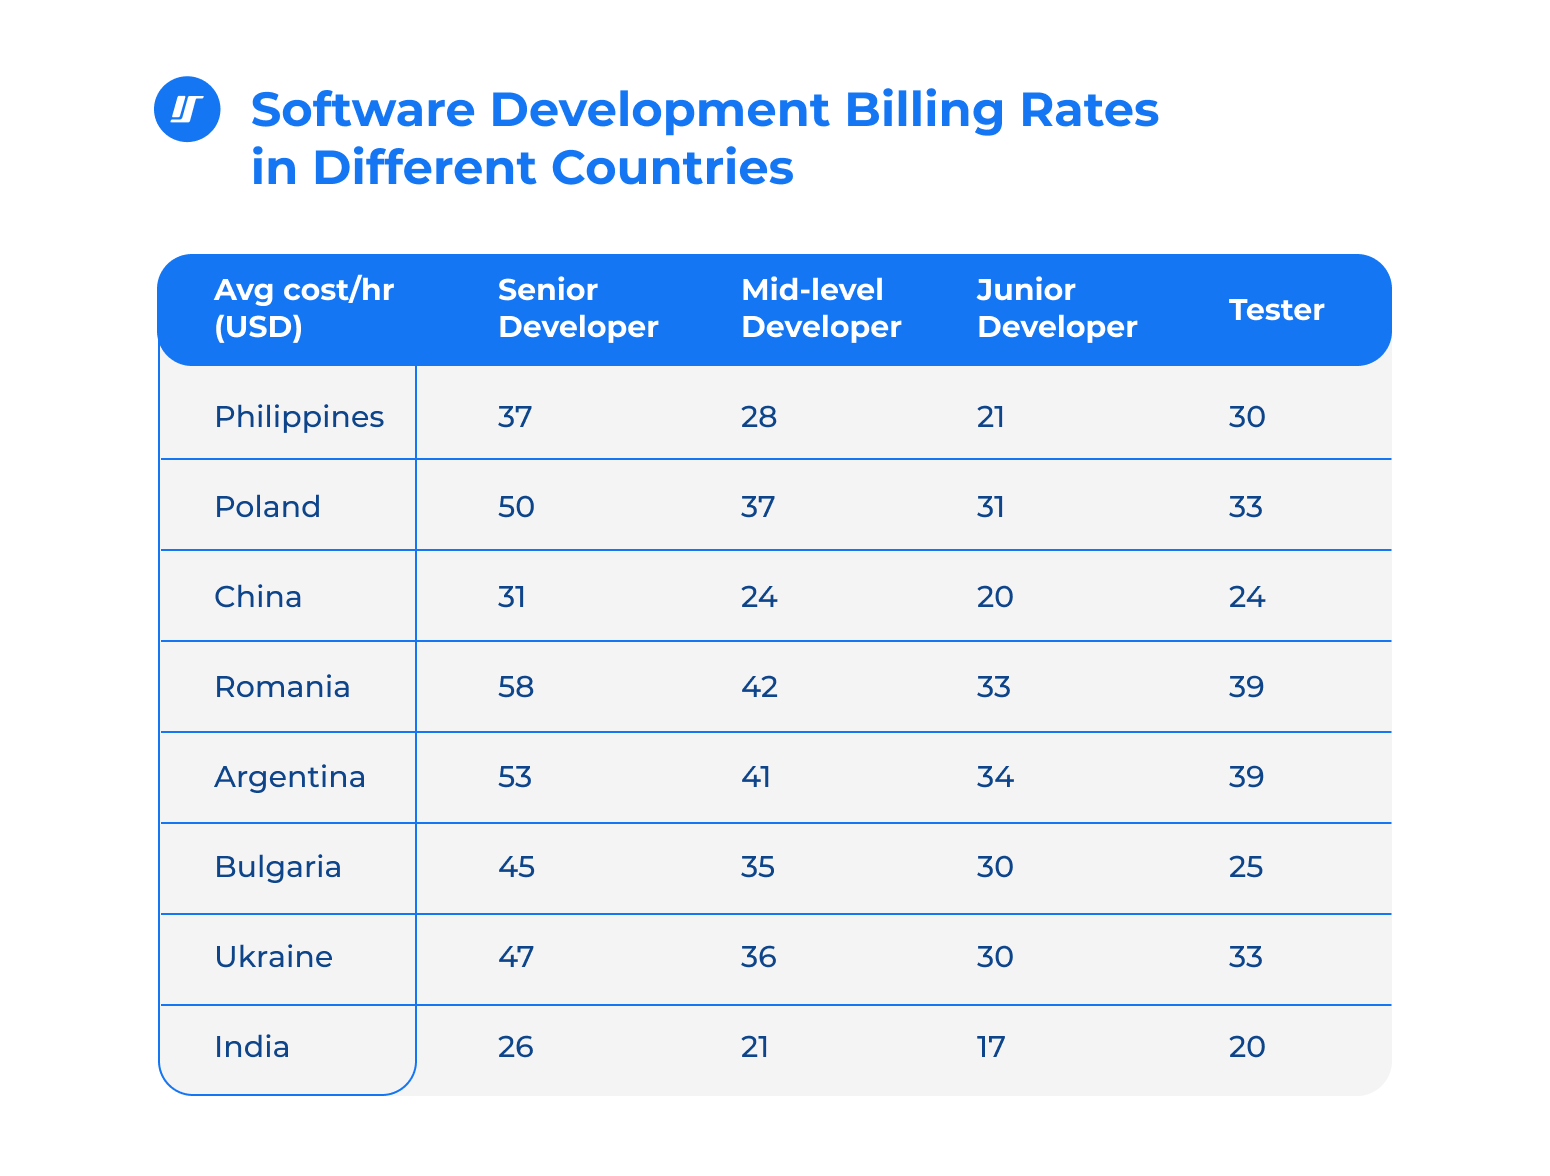 Table of software development billing rates in different countries